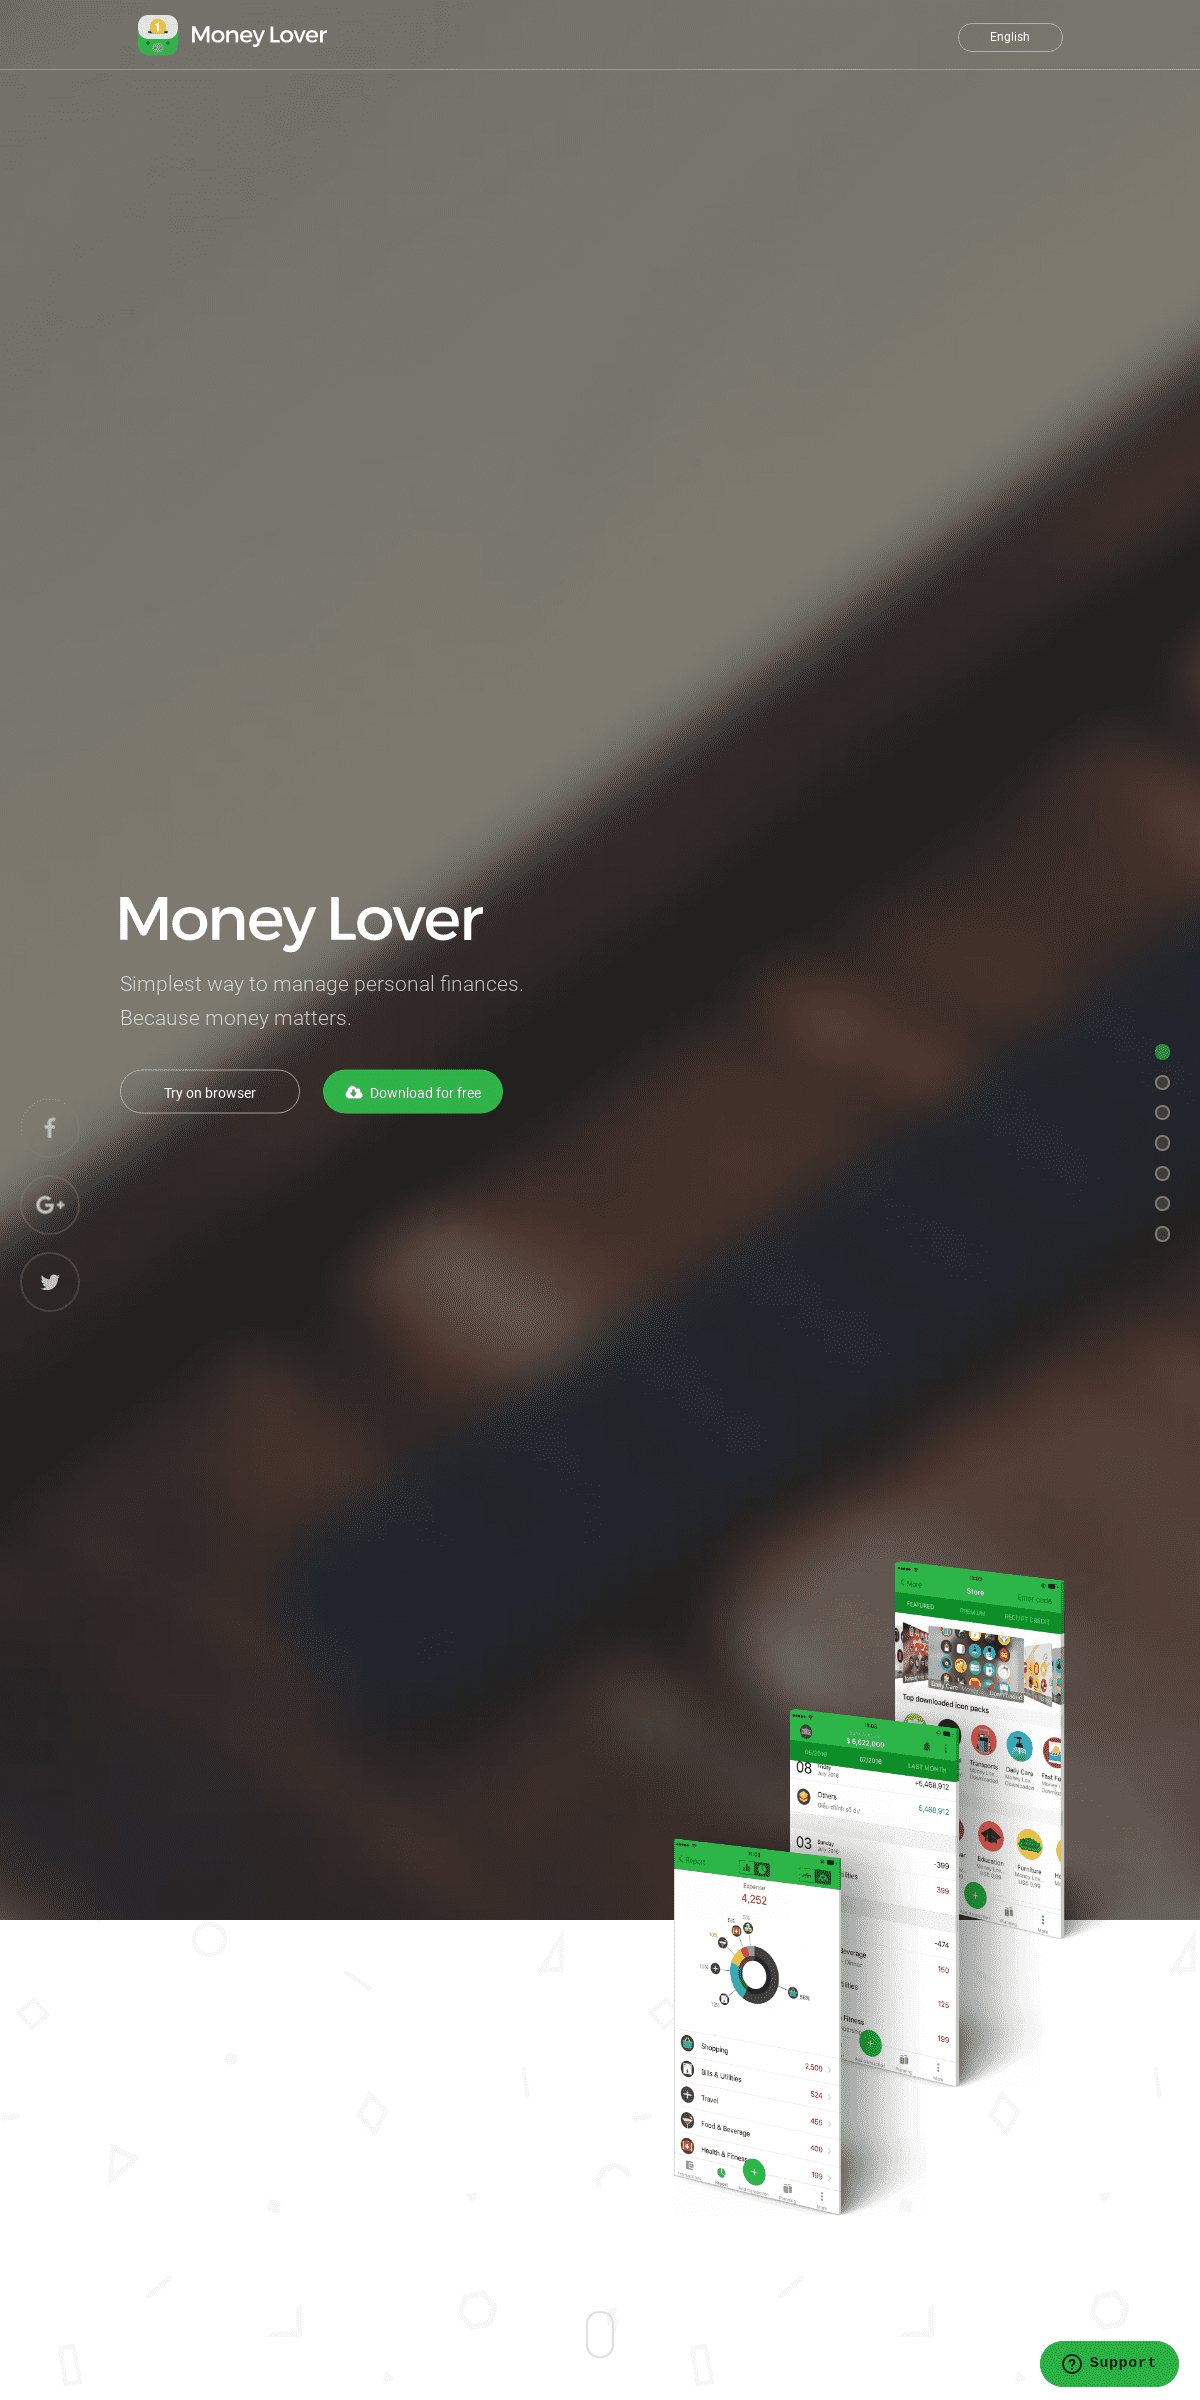 A complete backup of moneylover.me